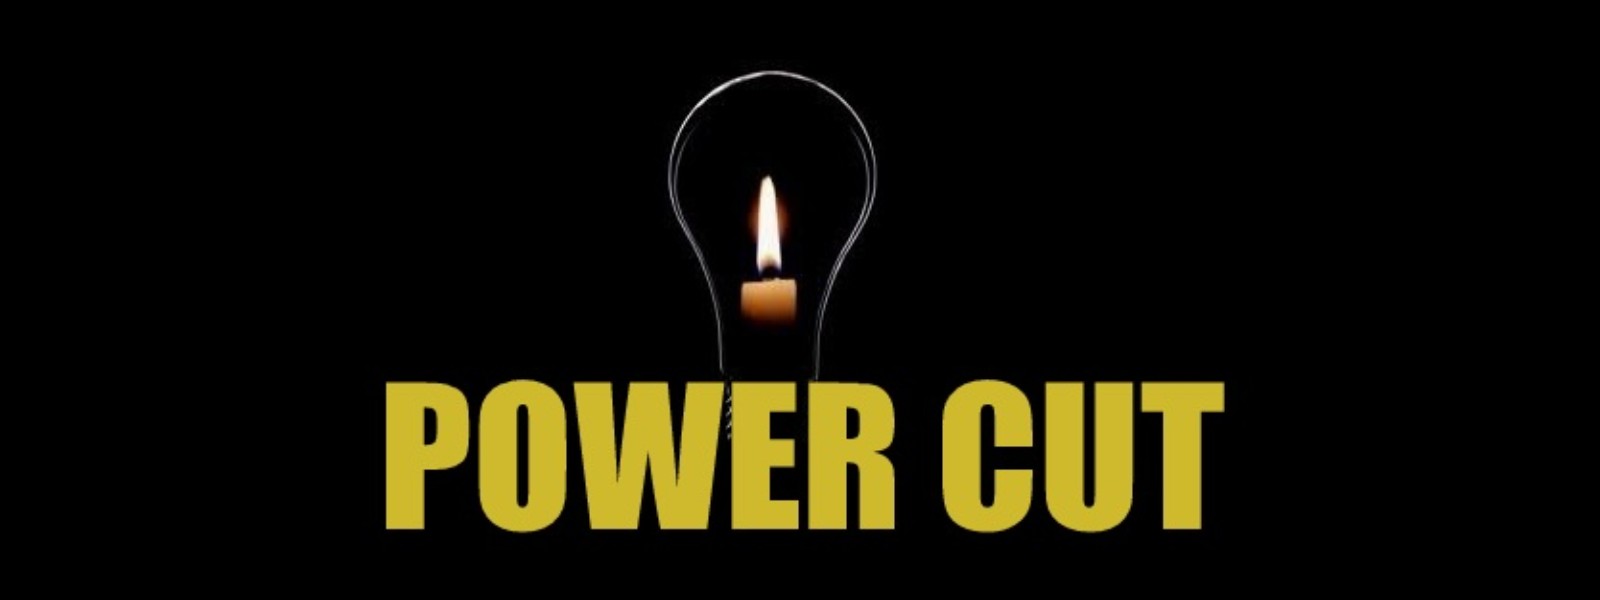 3-hour power cut approved for Wednesday (24)